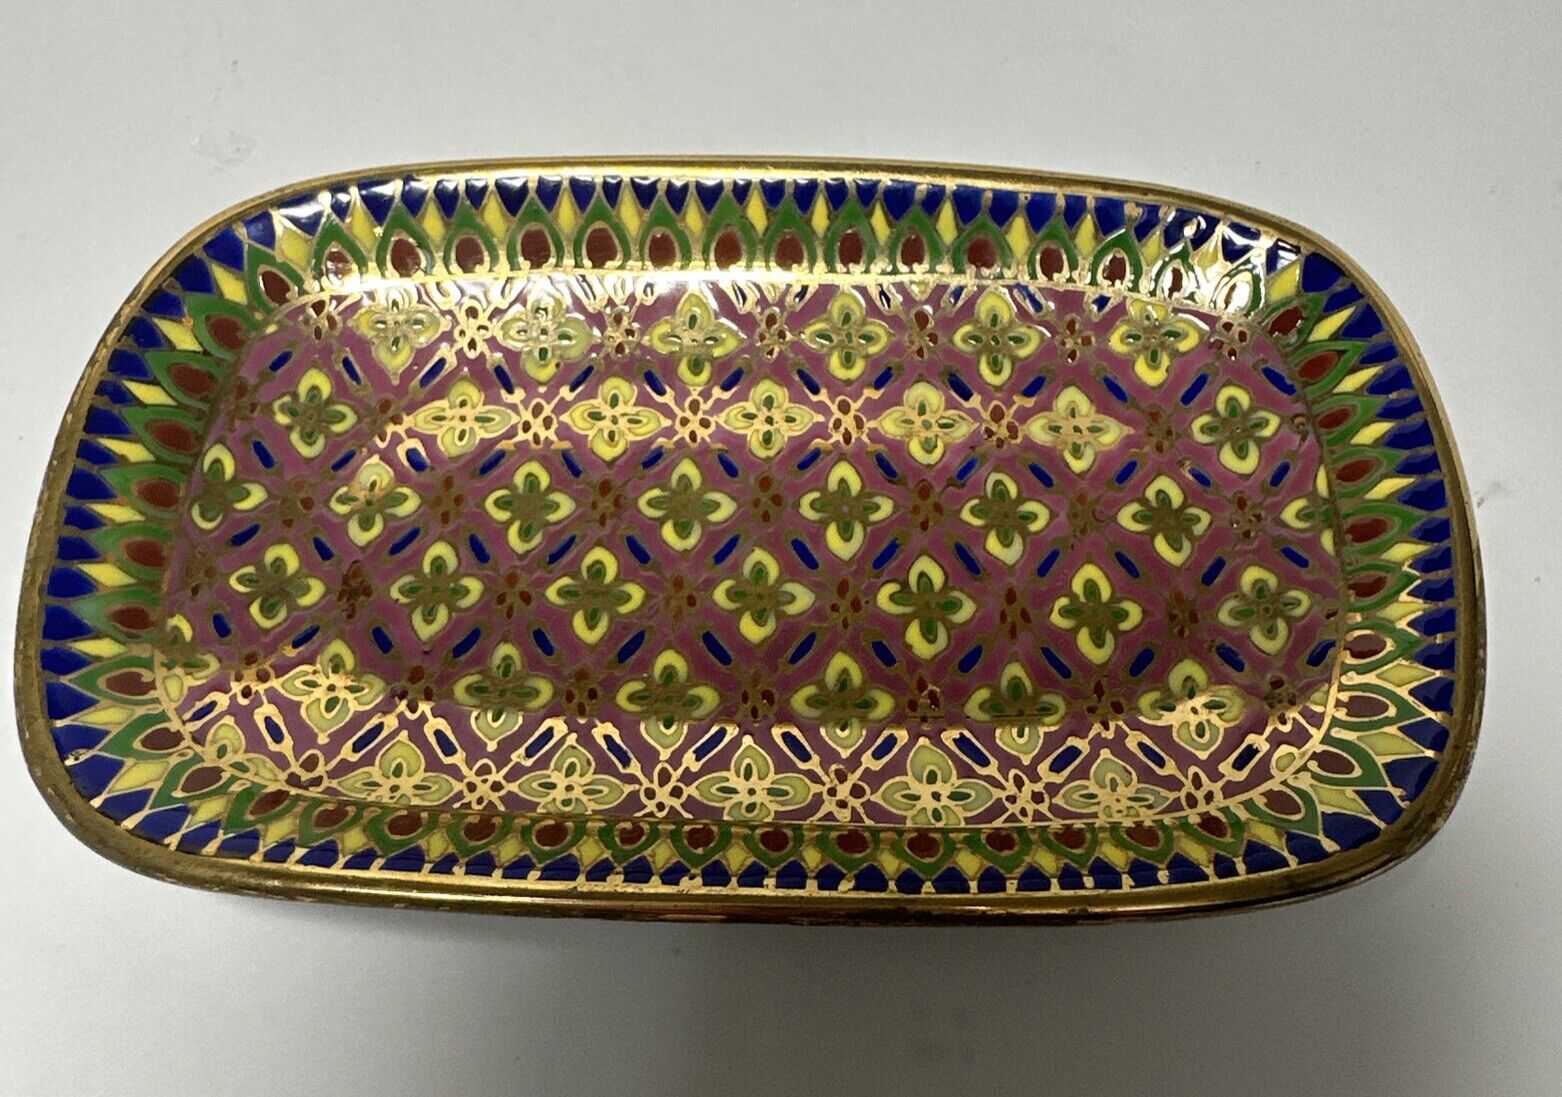 Vintage Cloisonne Sm. Trinket Dish Plate Made In Thailand. Great Condition 5 X 3